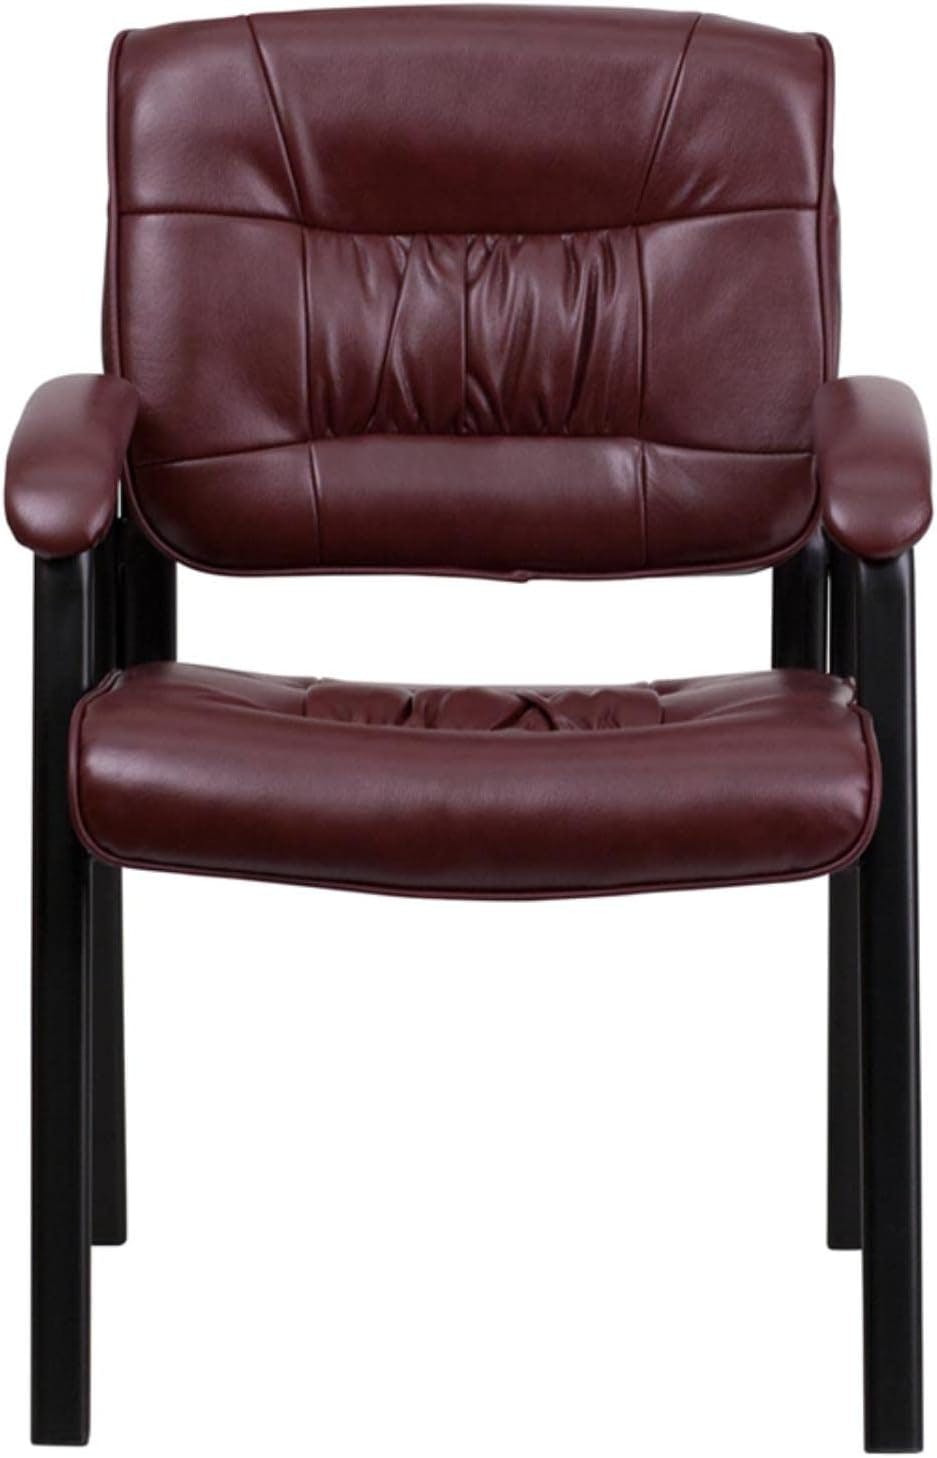 Burgundy LeatherSoft High Back Swivel Executive Chair with Metal Frame